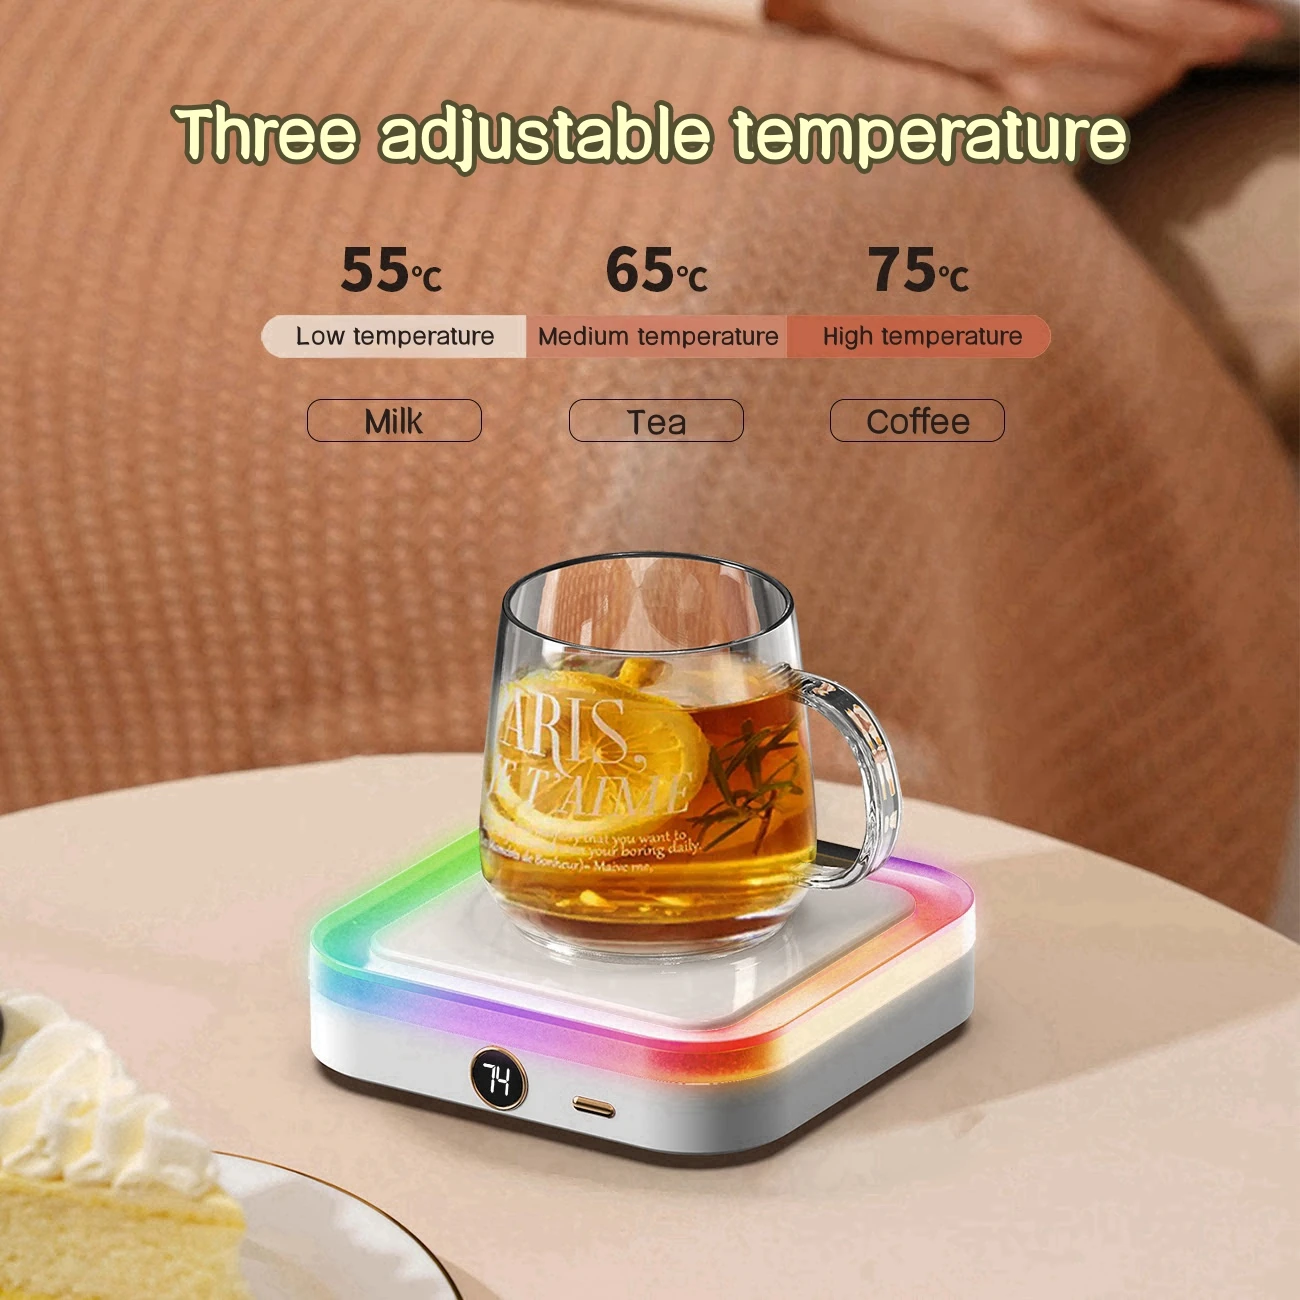 DC5V USB Coffee Mug Warmer 3 Gear Temperature Cup Warmer Heating Coasters Plate Pad for Tea Water Milk with Colorful Night Light lovely cherry blossom coasters kawaii heat insulation table mat for tea milk cup cute desk accessories home decoration office